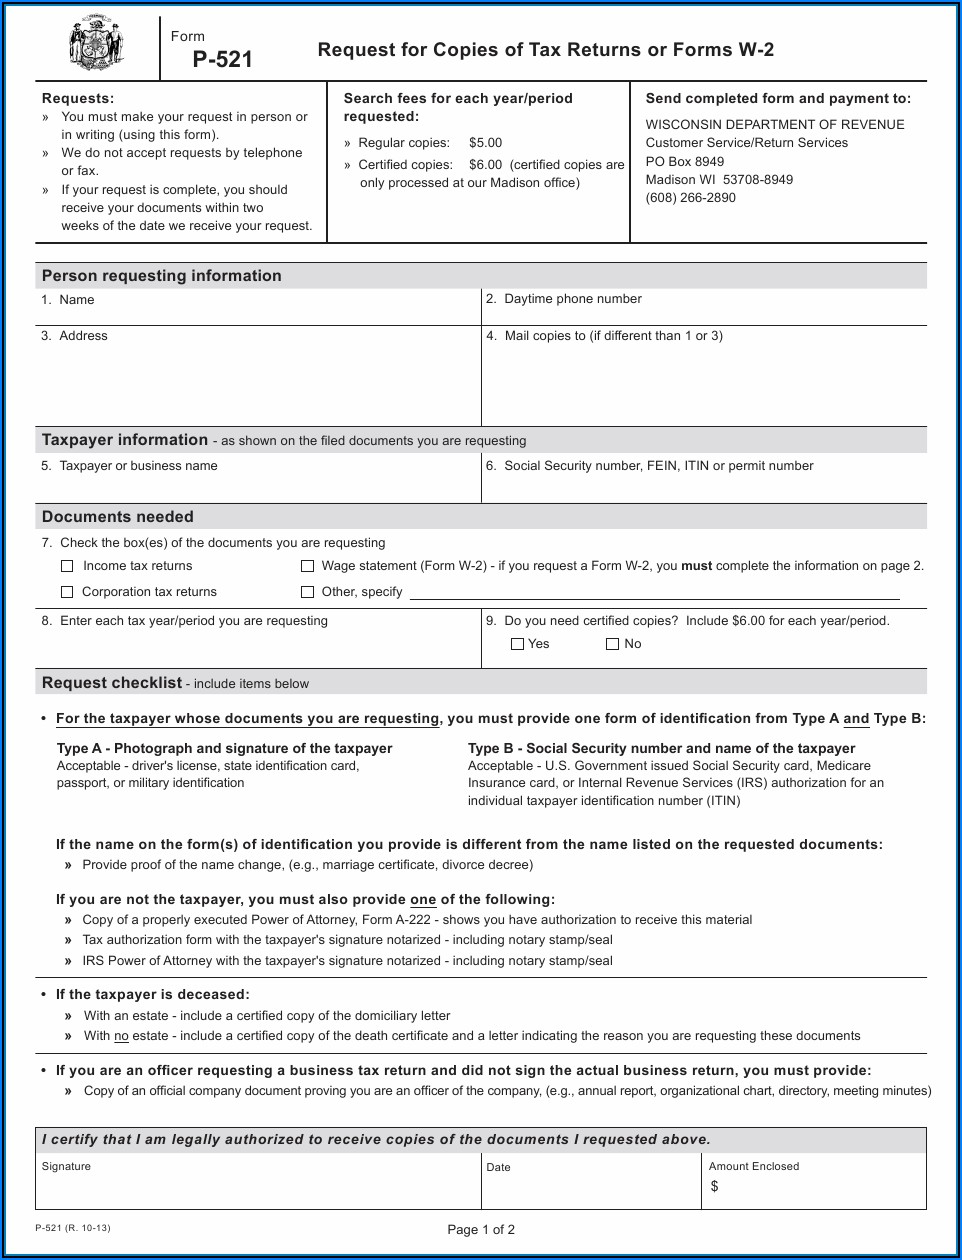 Request W2 Forms Previous Years